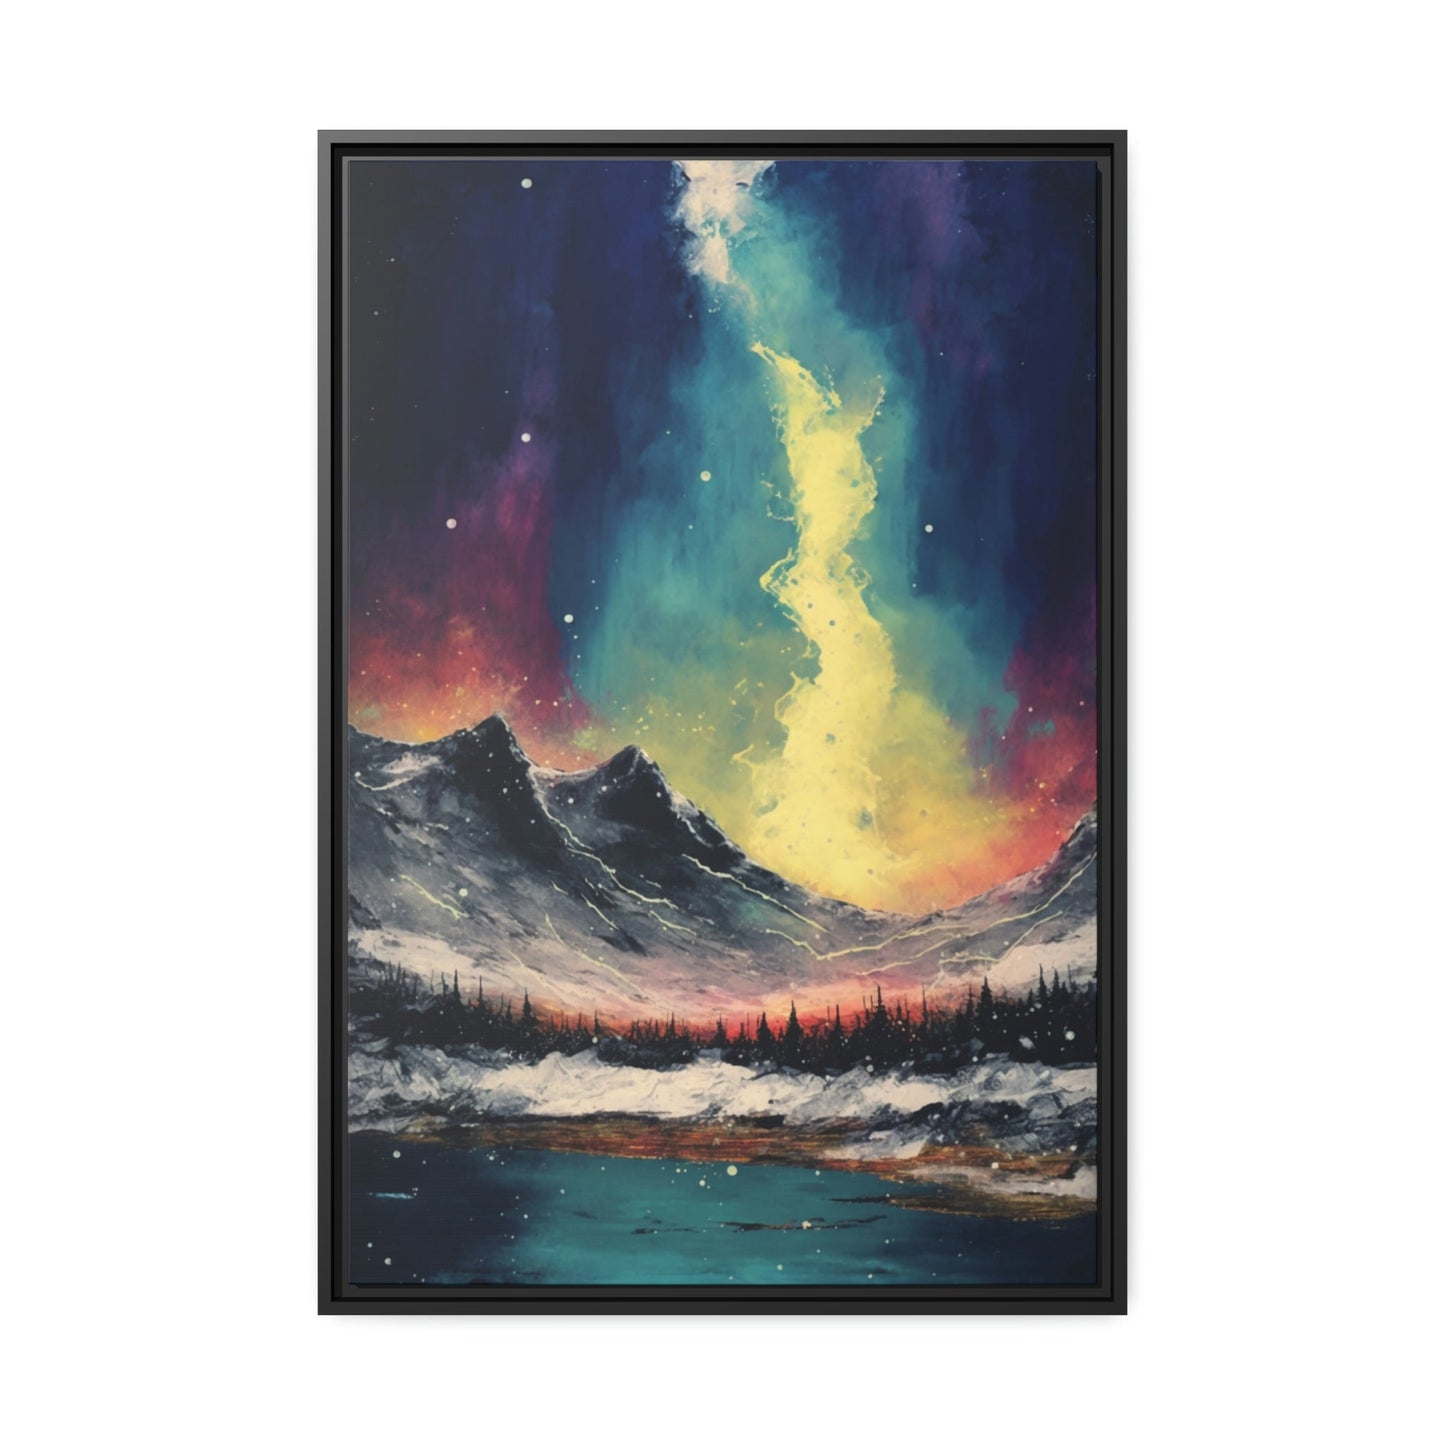 Landscape Impression: A Framed Poster & Canvas Print of an Artistic View